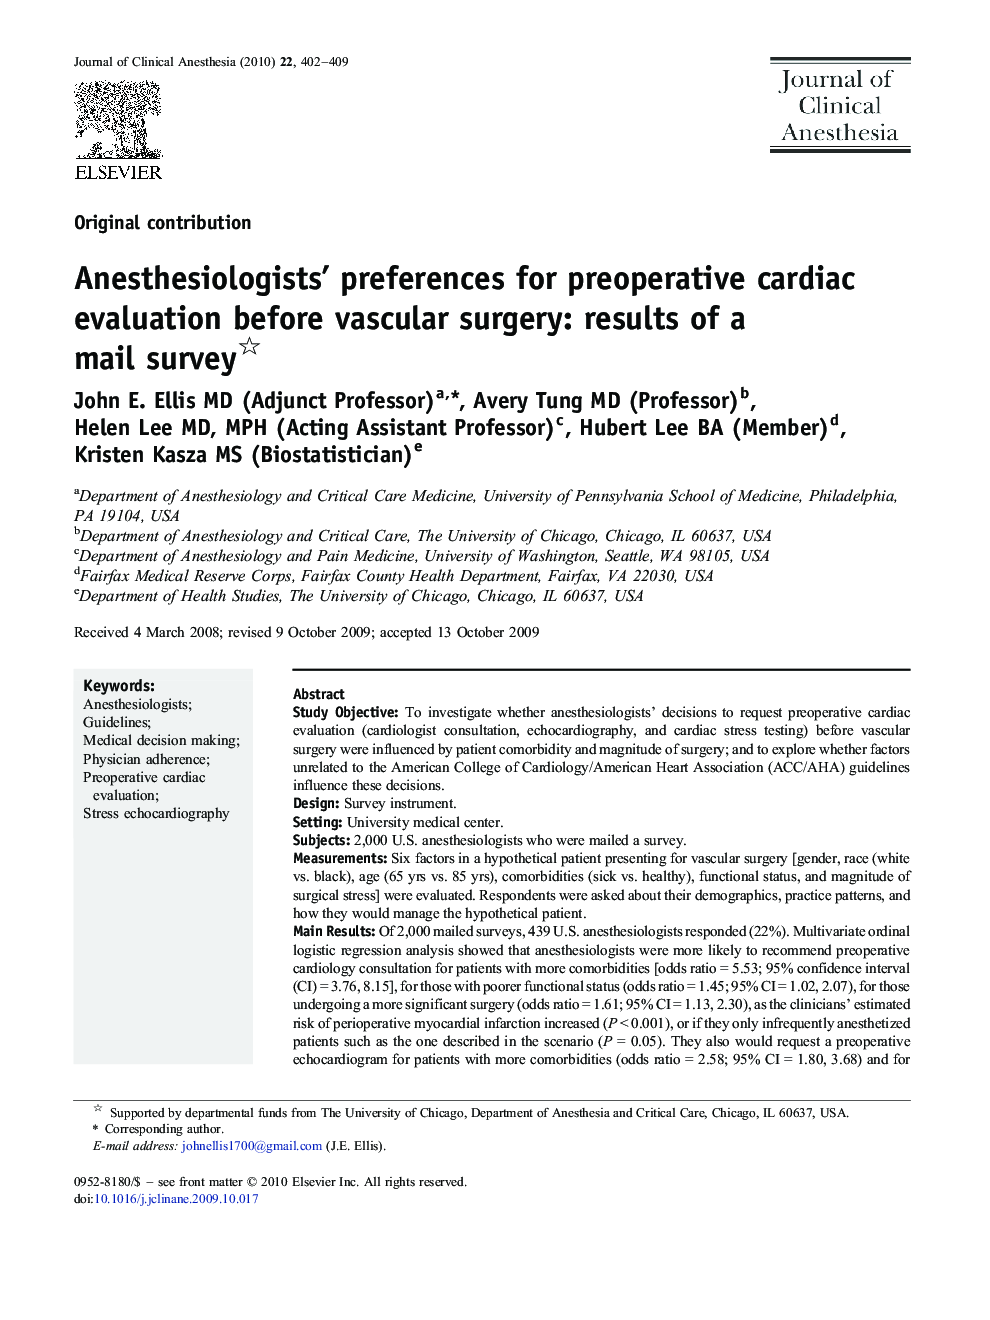 Anesthesiologists’ preferences for preoperative cardiac evaluation before vascular surgery: results of a mail survey 